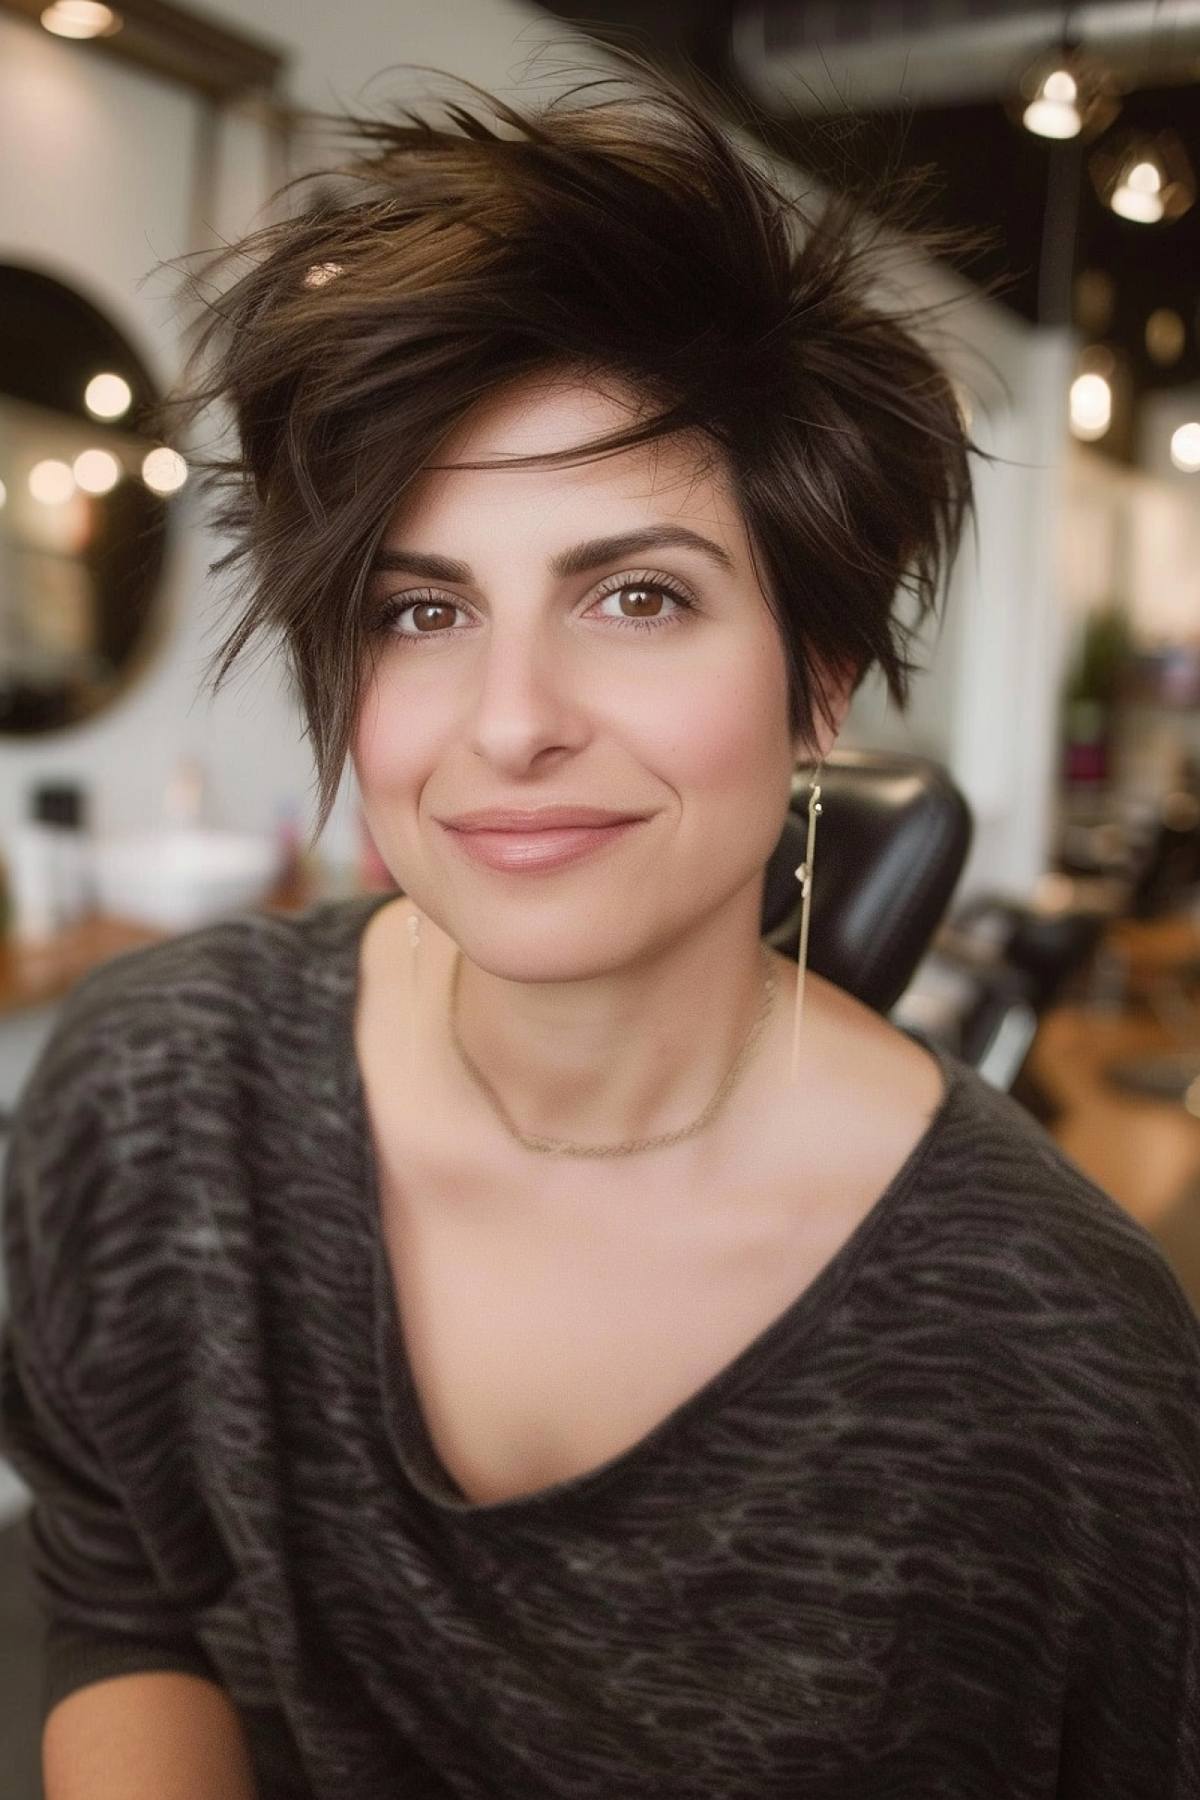 Stylish woman with voluminous short fluffy textured pixie cut in espresso